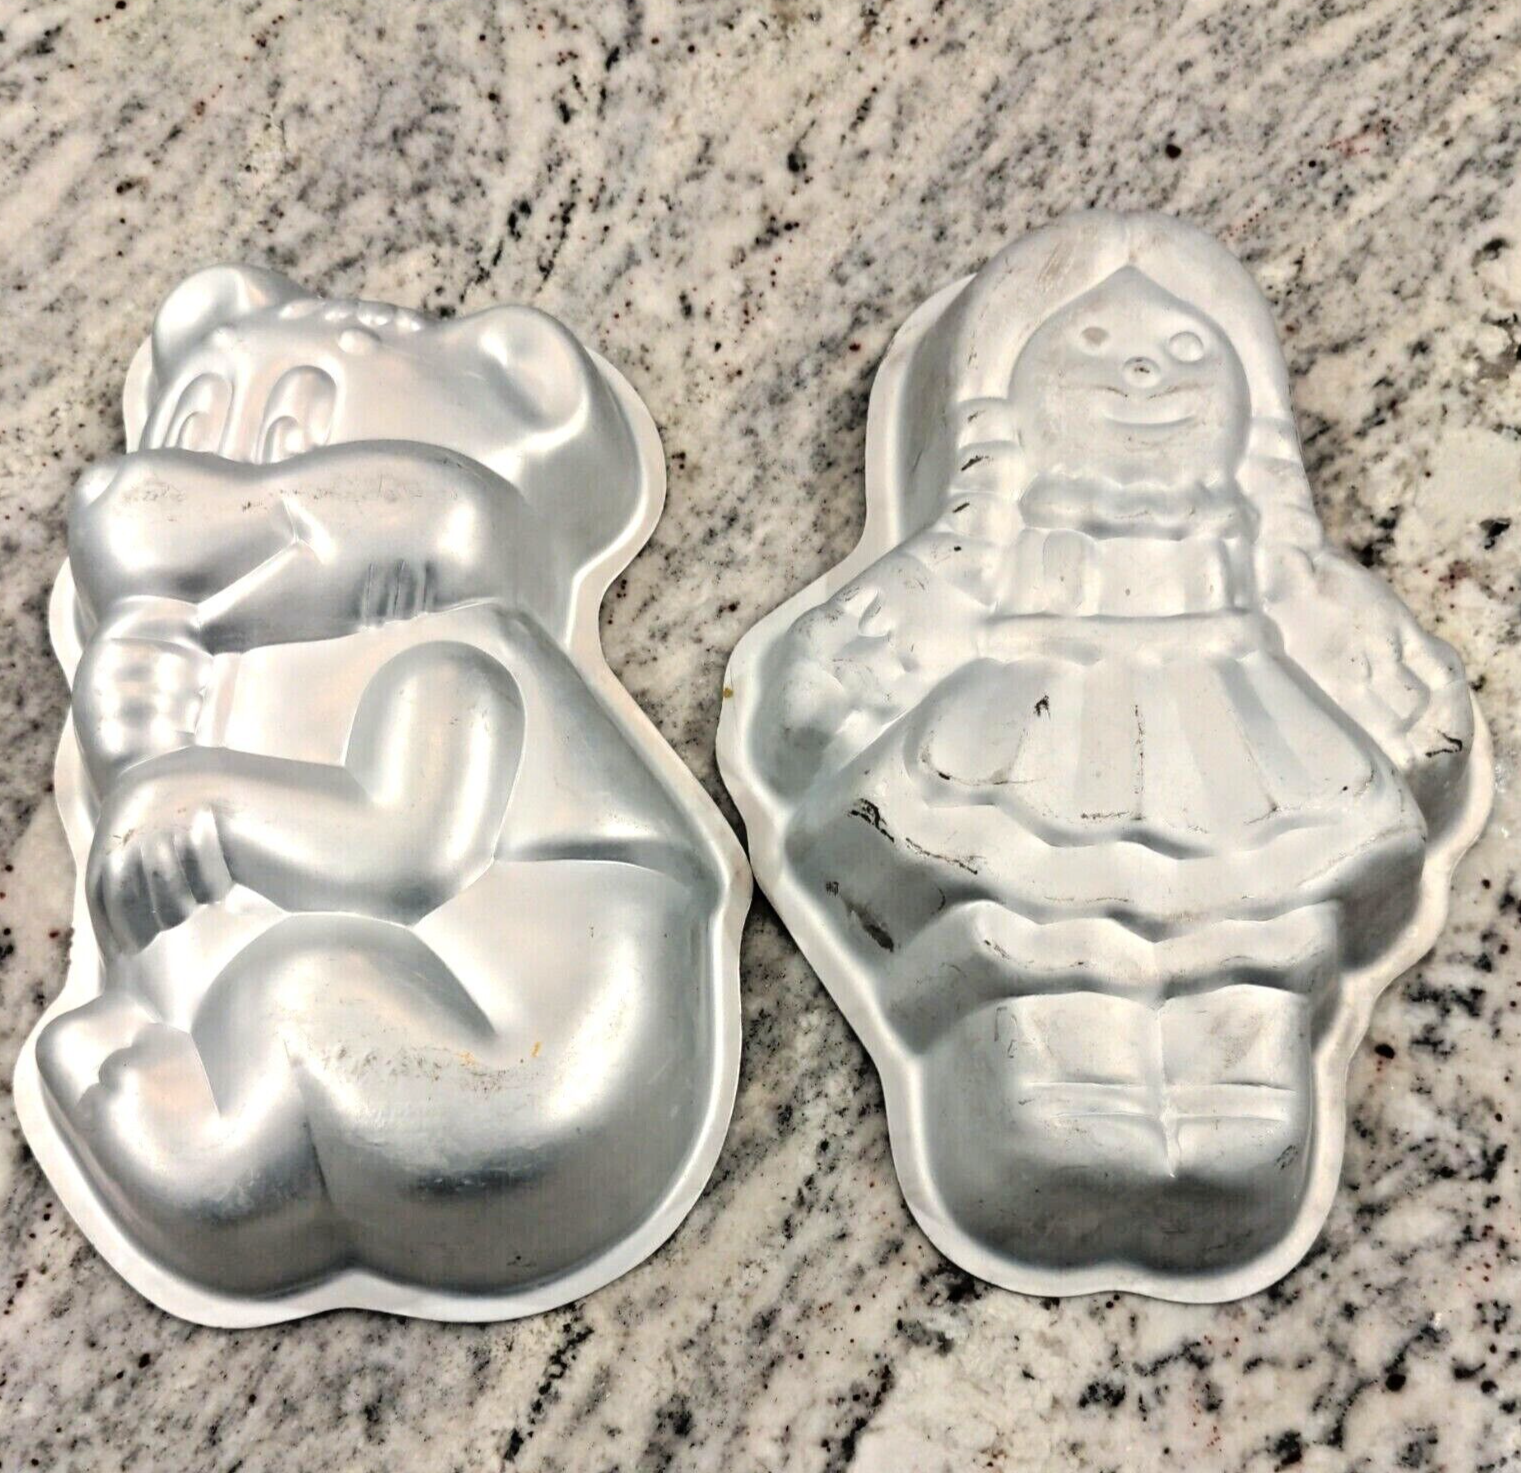 VTG 1975 Wilton Lot of 2 Cake Pans Girl with Pigtails & Honey / Teddy Bear - $6.13